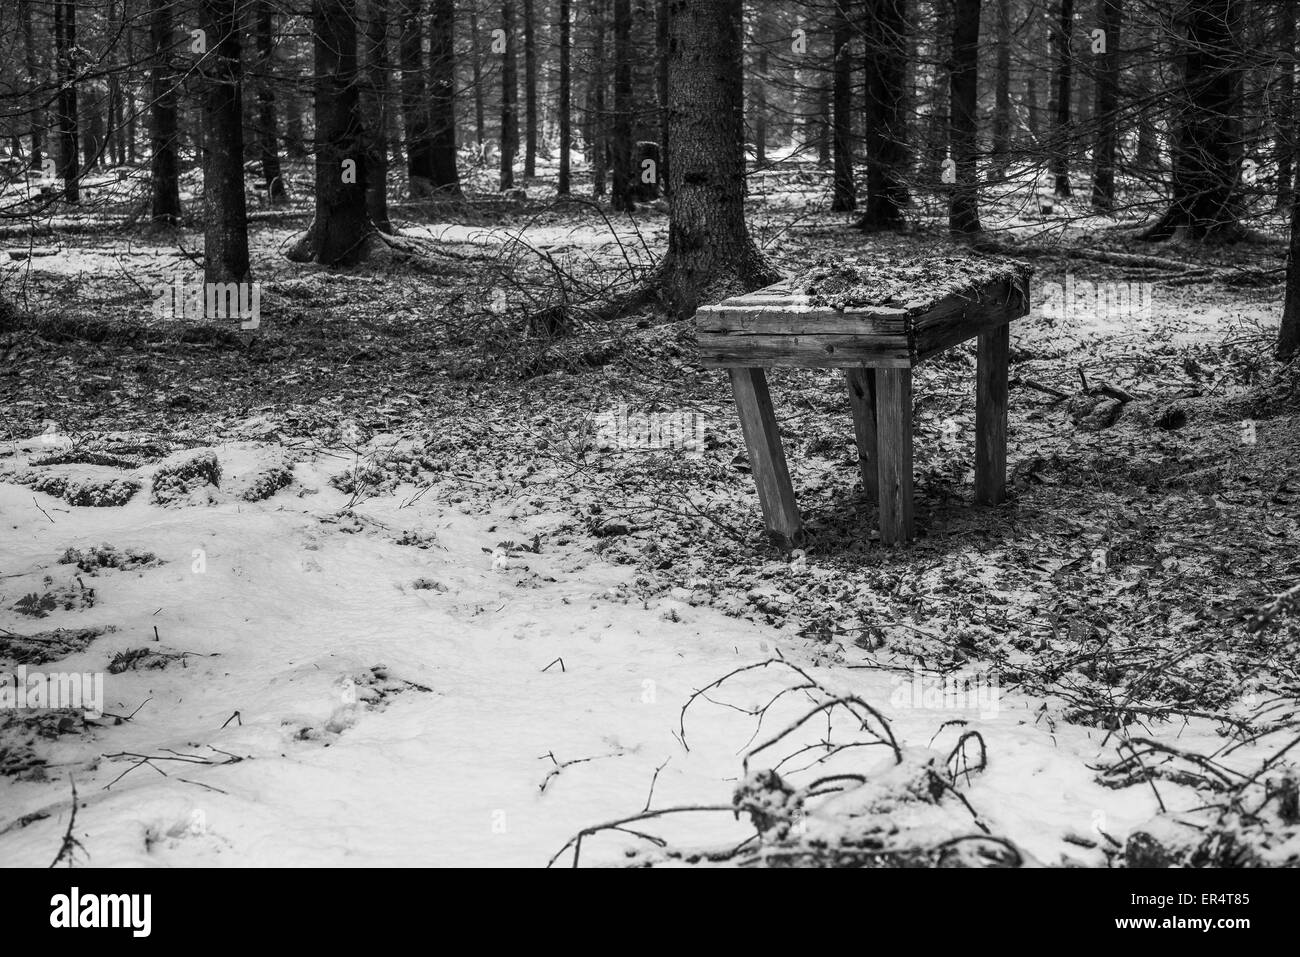 Single old wooden seat left to rot in forest Stock Photo